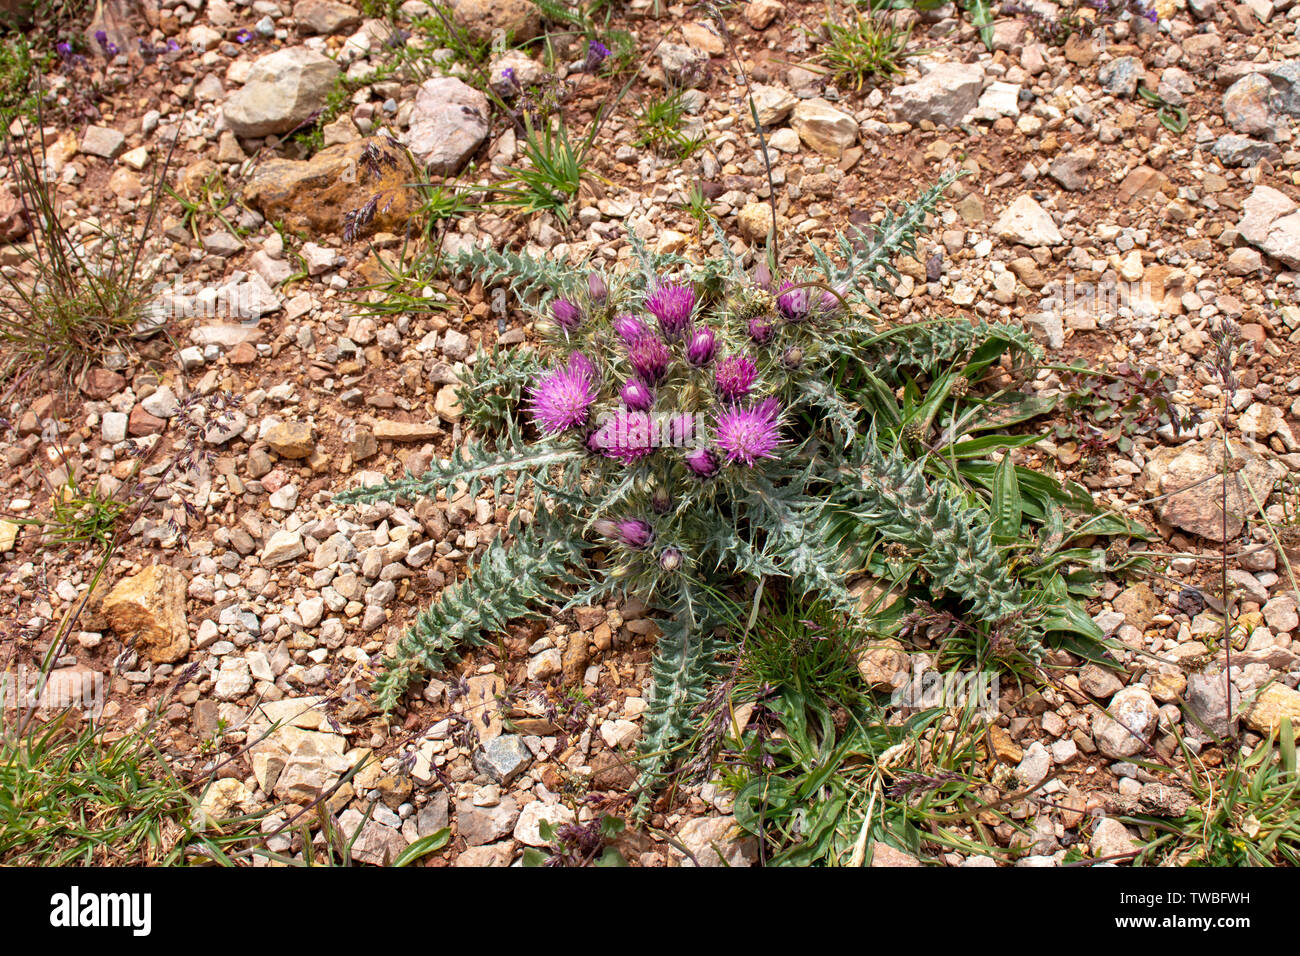 Carduus carpetanus flowering plant with pink flowers on the alpine meadow Stock Photo